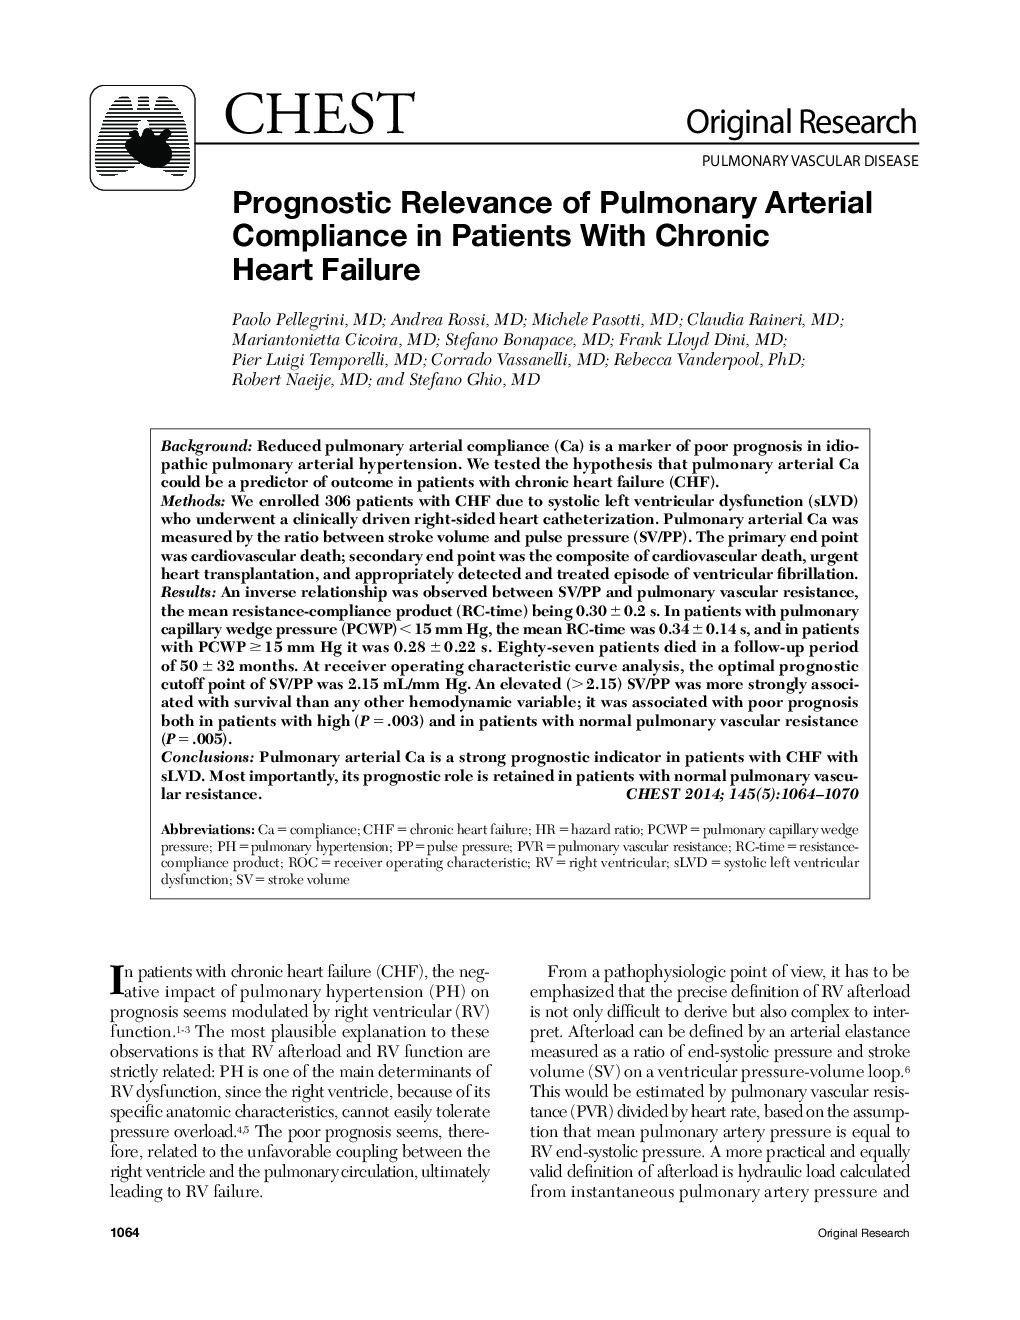 Prognostic Relevance of Pulmonary Arterial Compliance in Patients With Chronic Heart Failure 